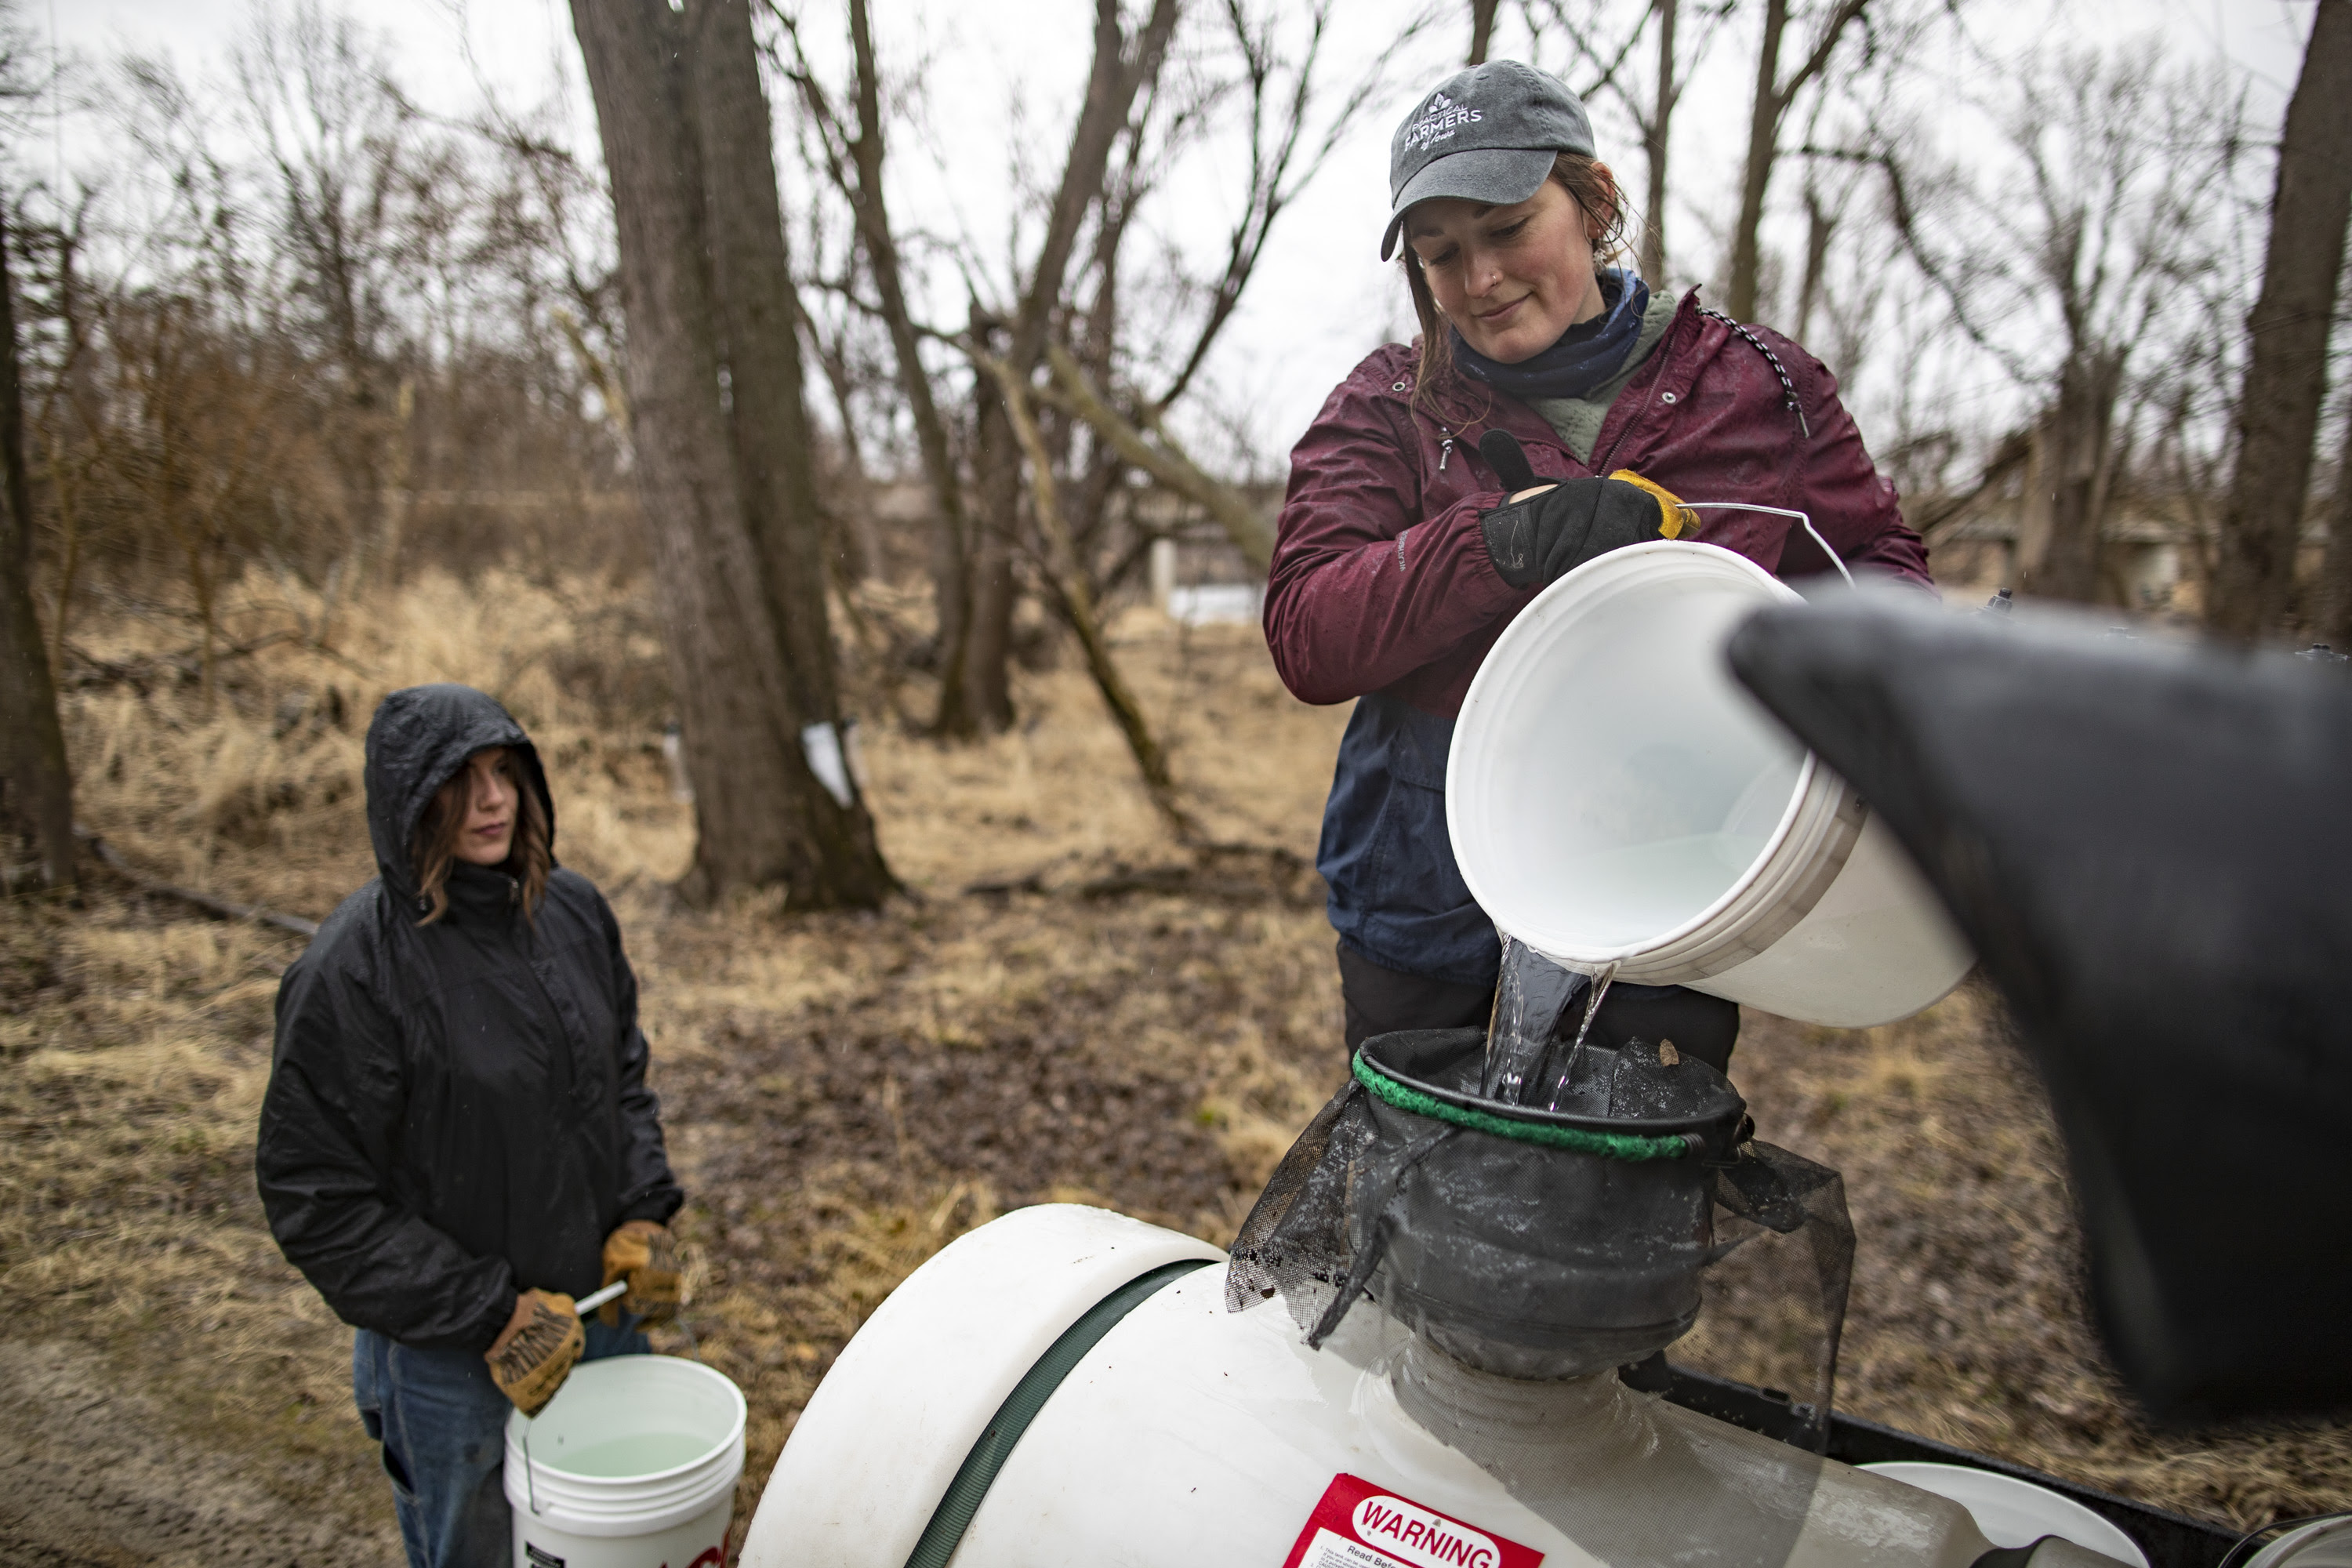 Midwest maple syrup producers adapt to record warm winter, uncertainty as climate changes